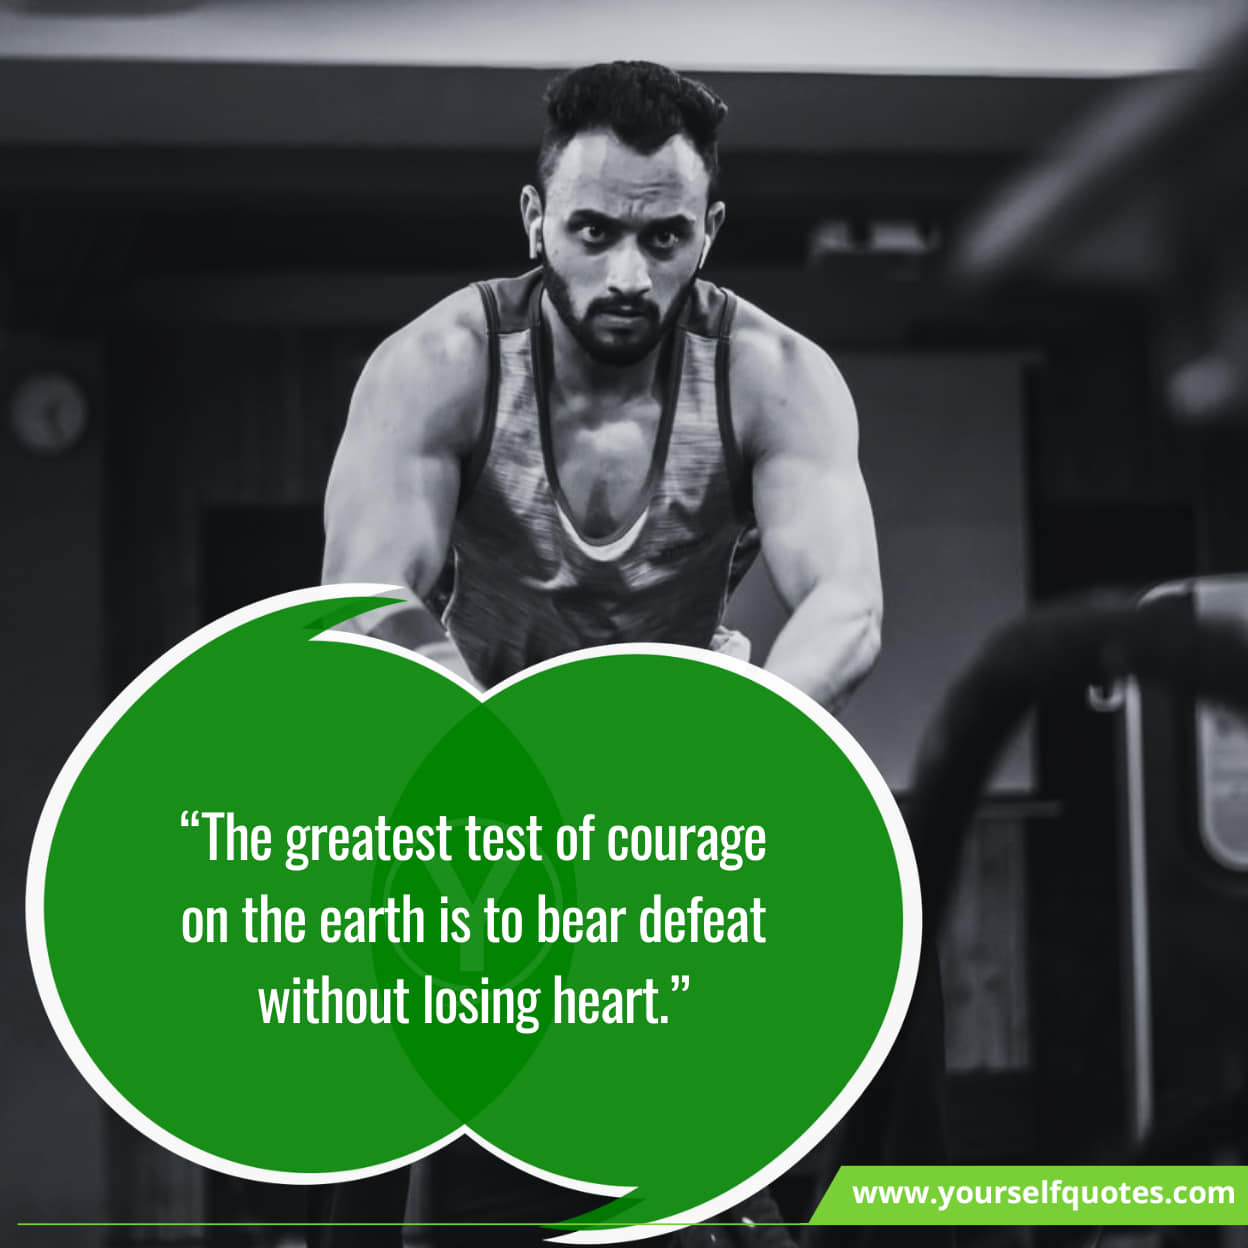 Famous Quotes On Being Strong Quotes